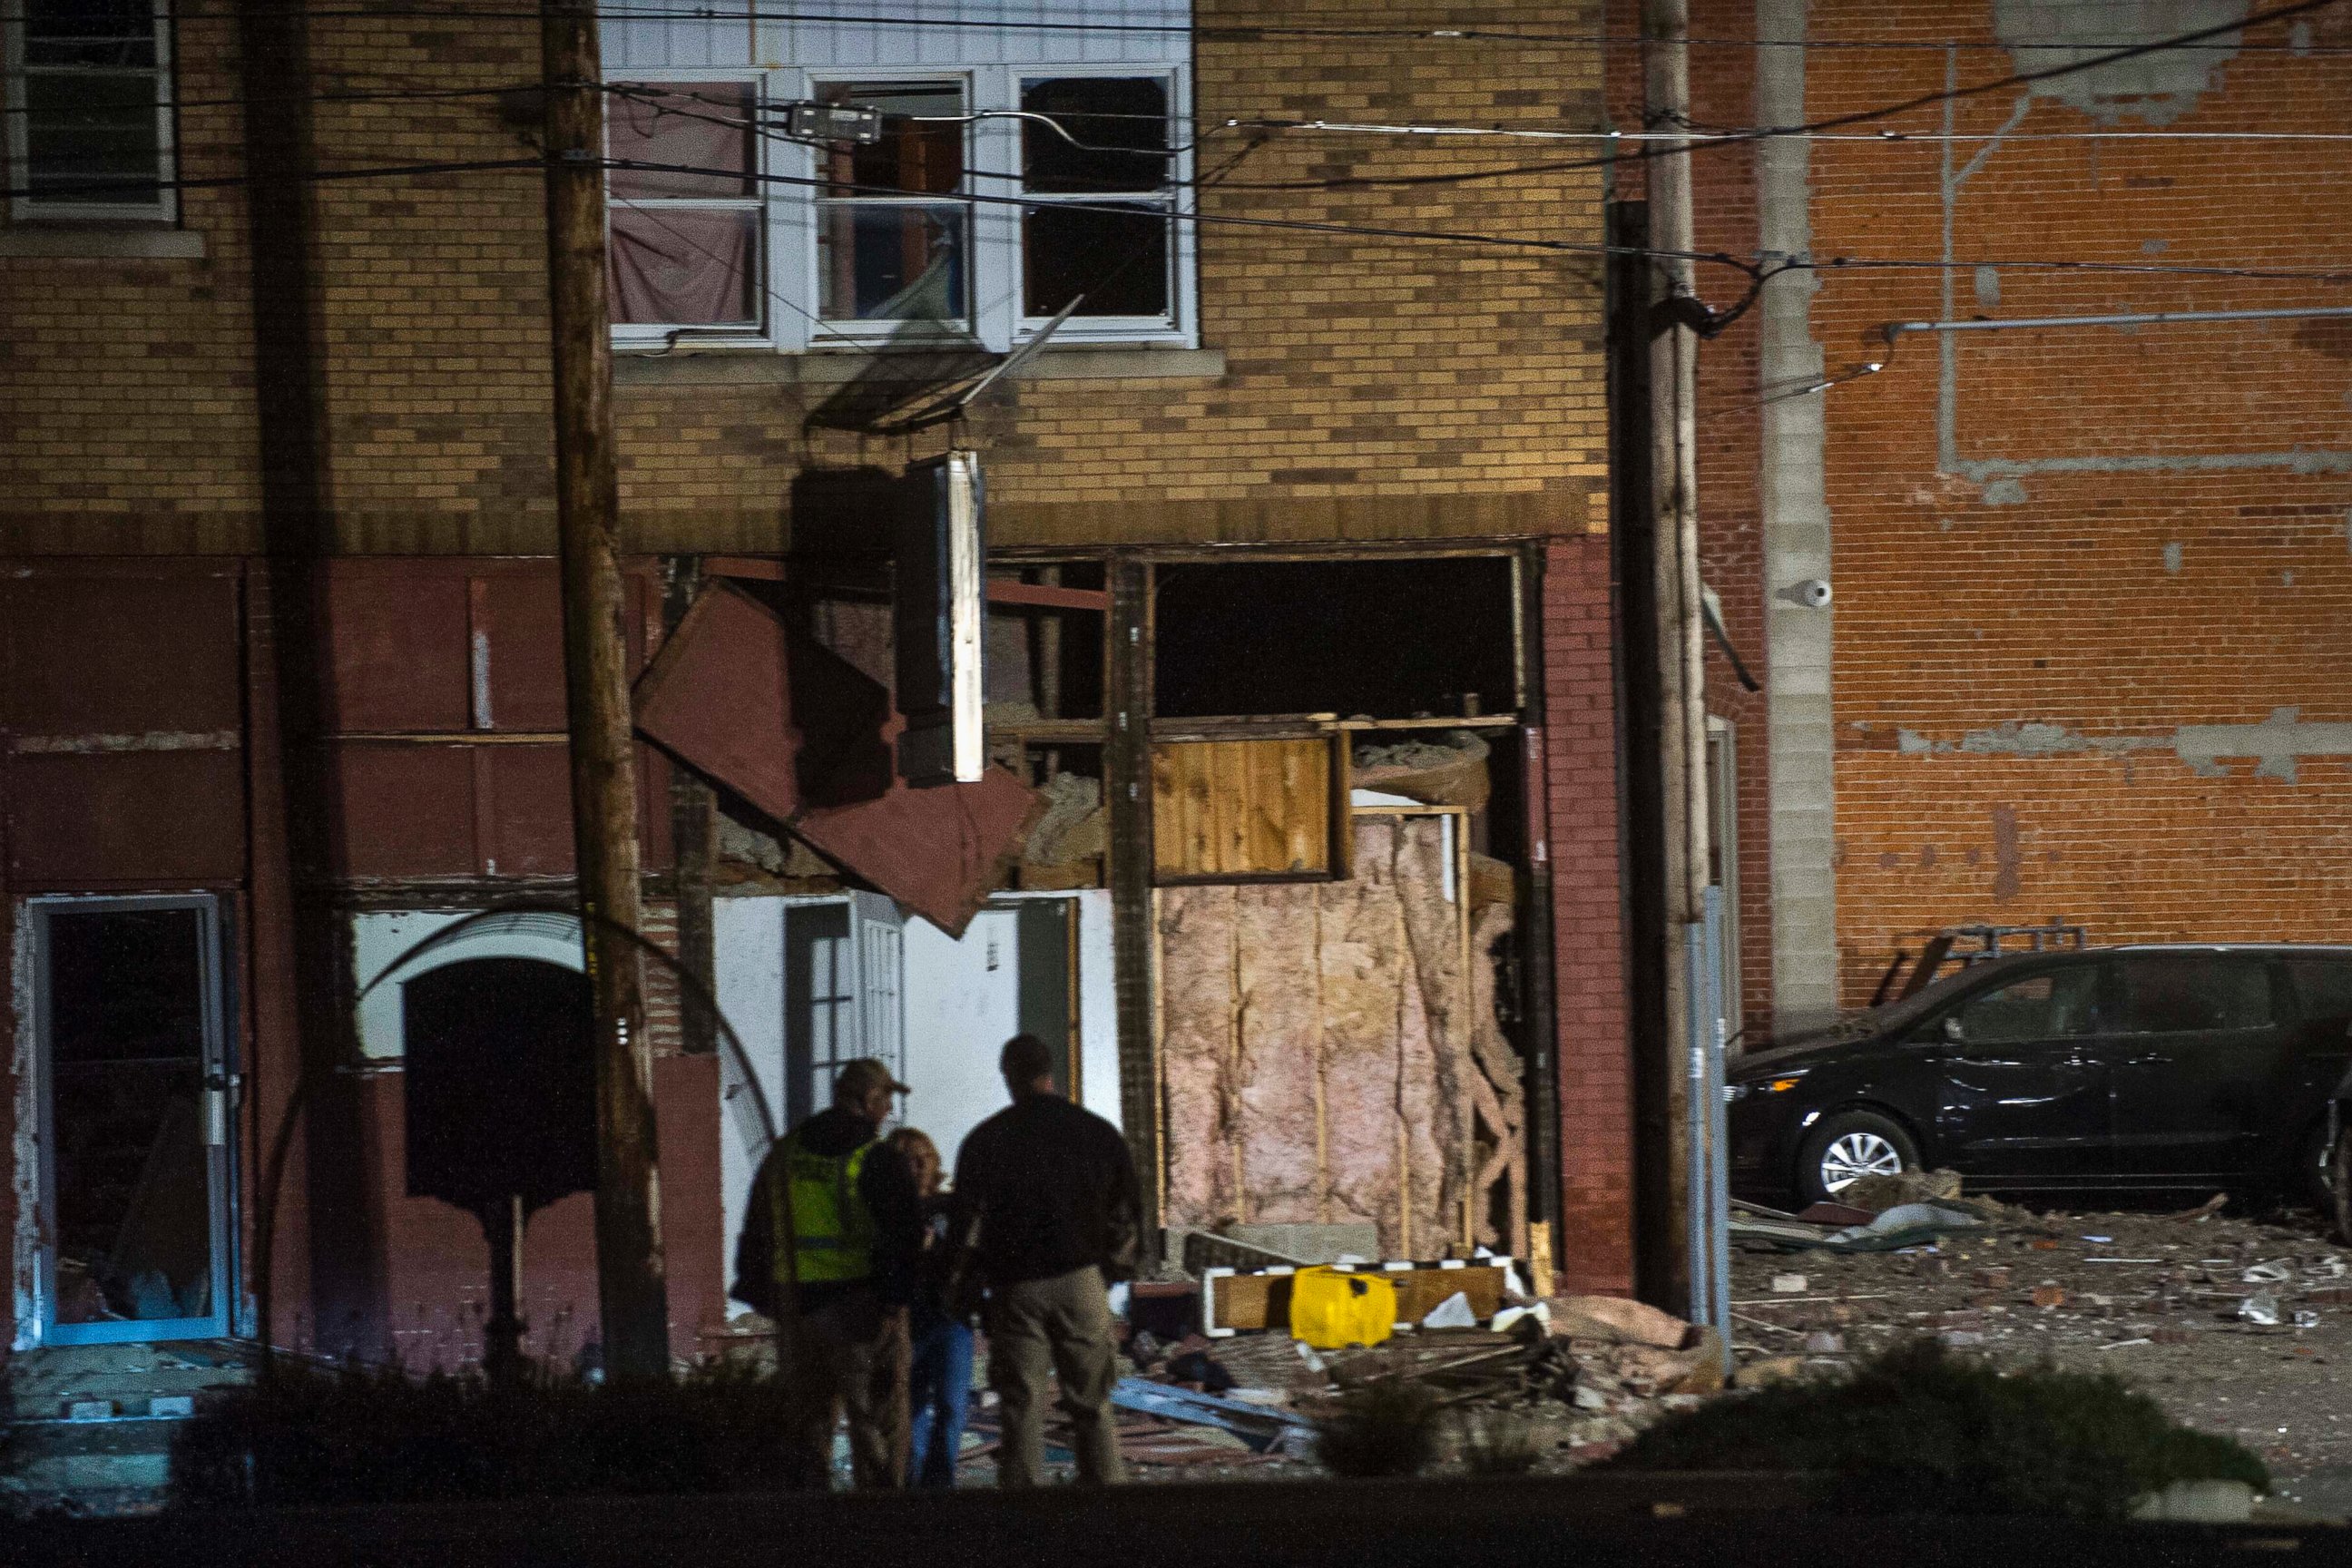 PHOTO: An explosion damaged several buildings near the downtown square in Canton, Illinois, Nov. 16, 2016.